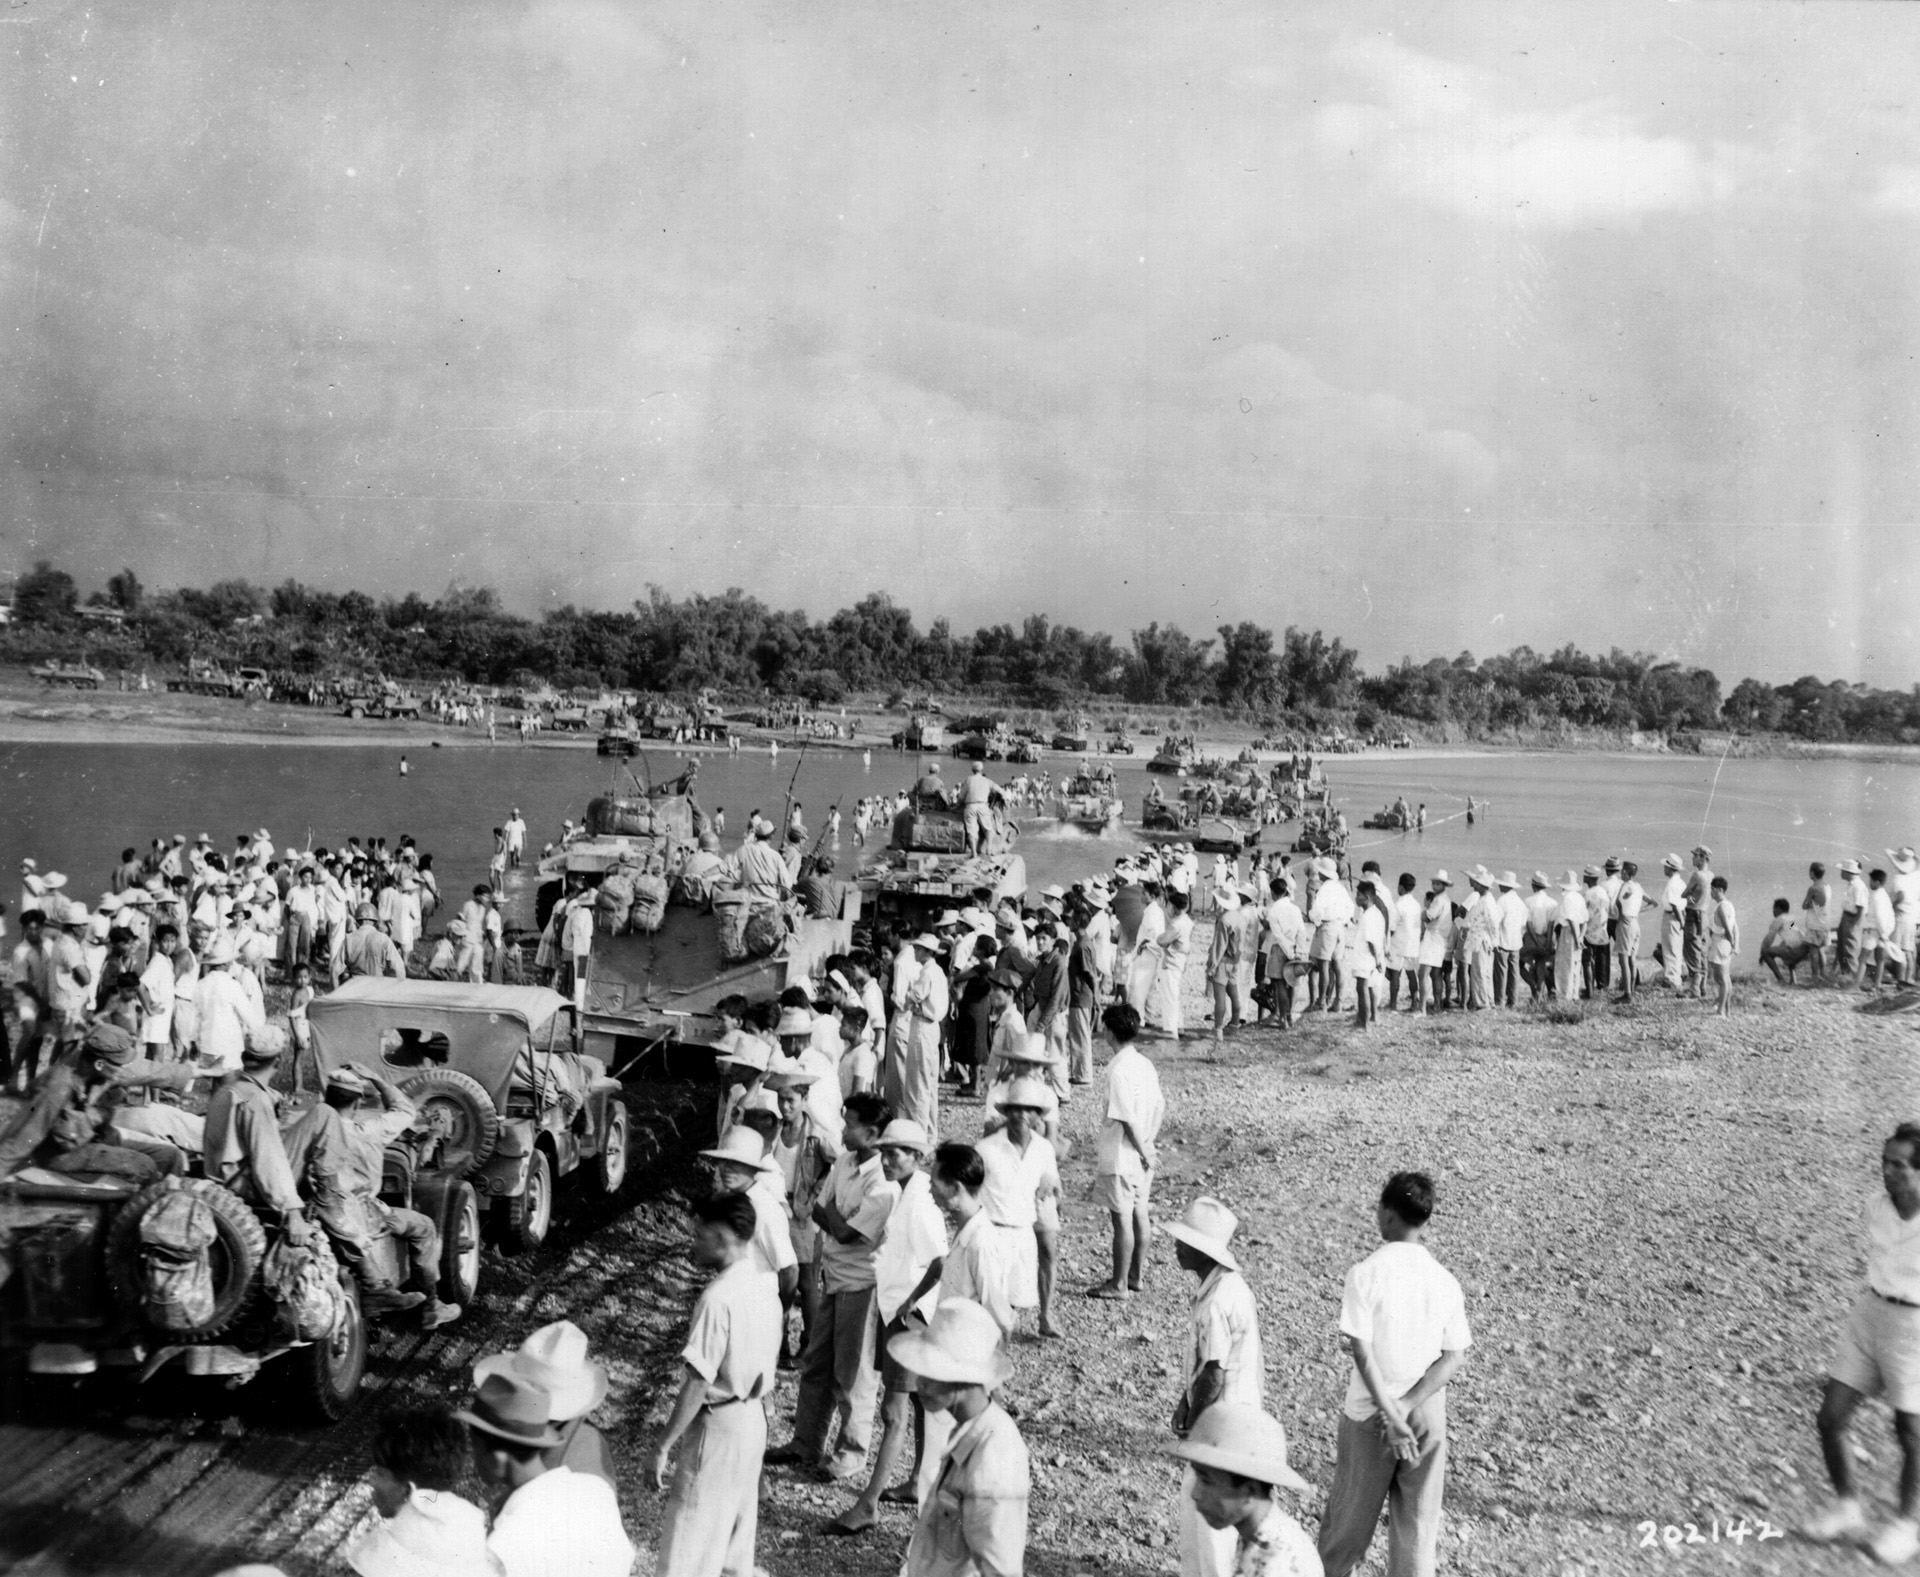 Twenty-five miles from Manila, American soldiers of the 1st Cavalry and Filipino civilians gather along the banks of the Angat River.